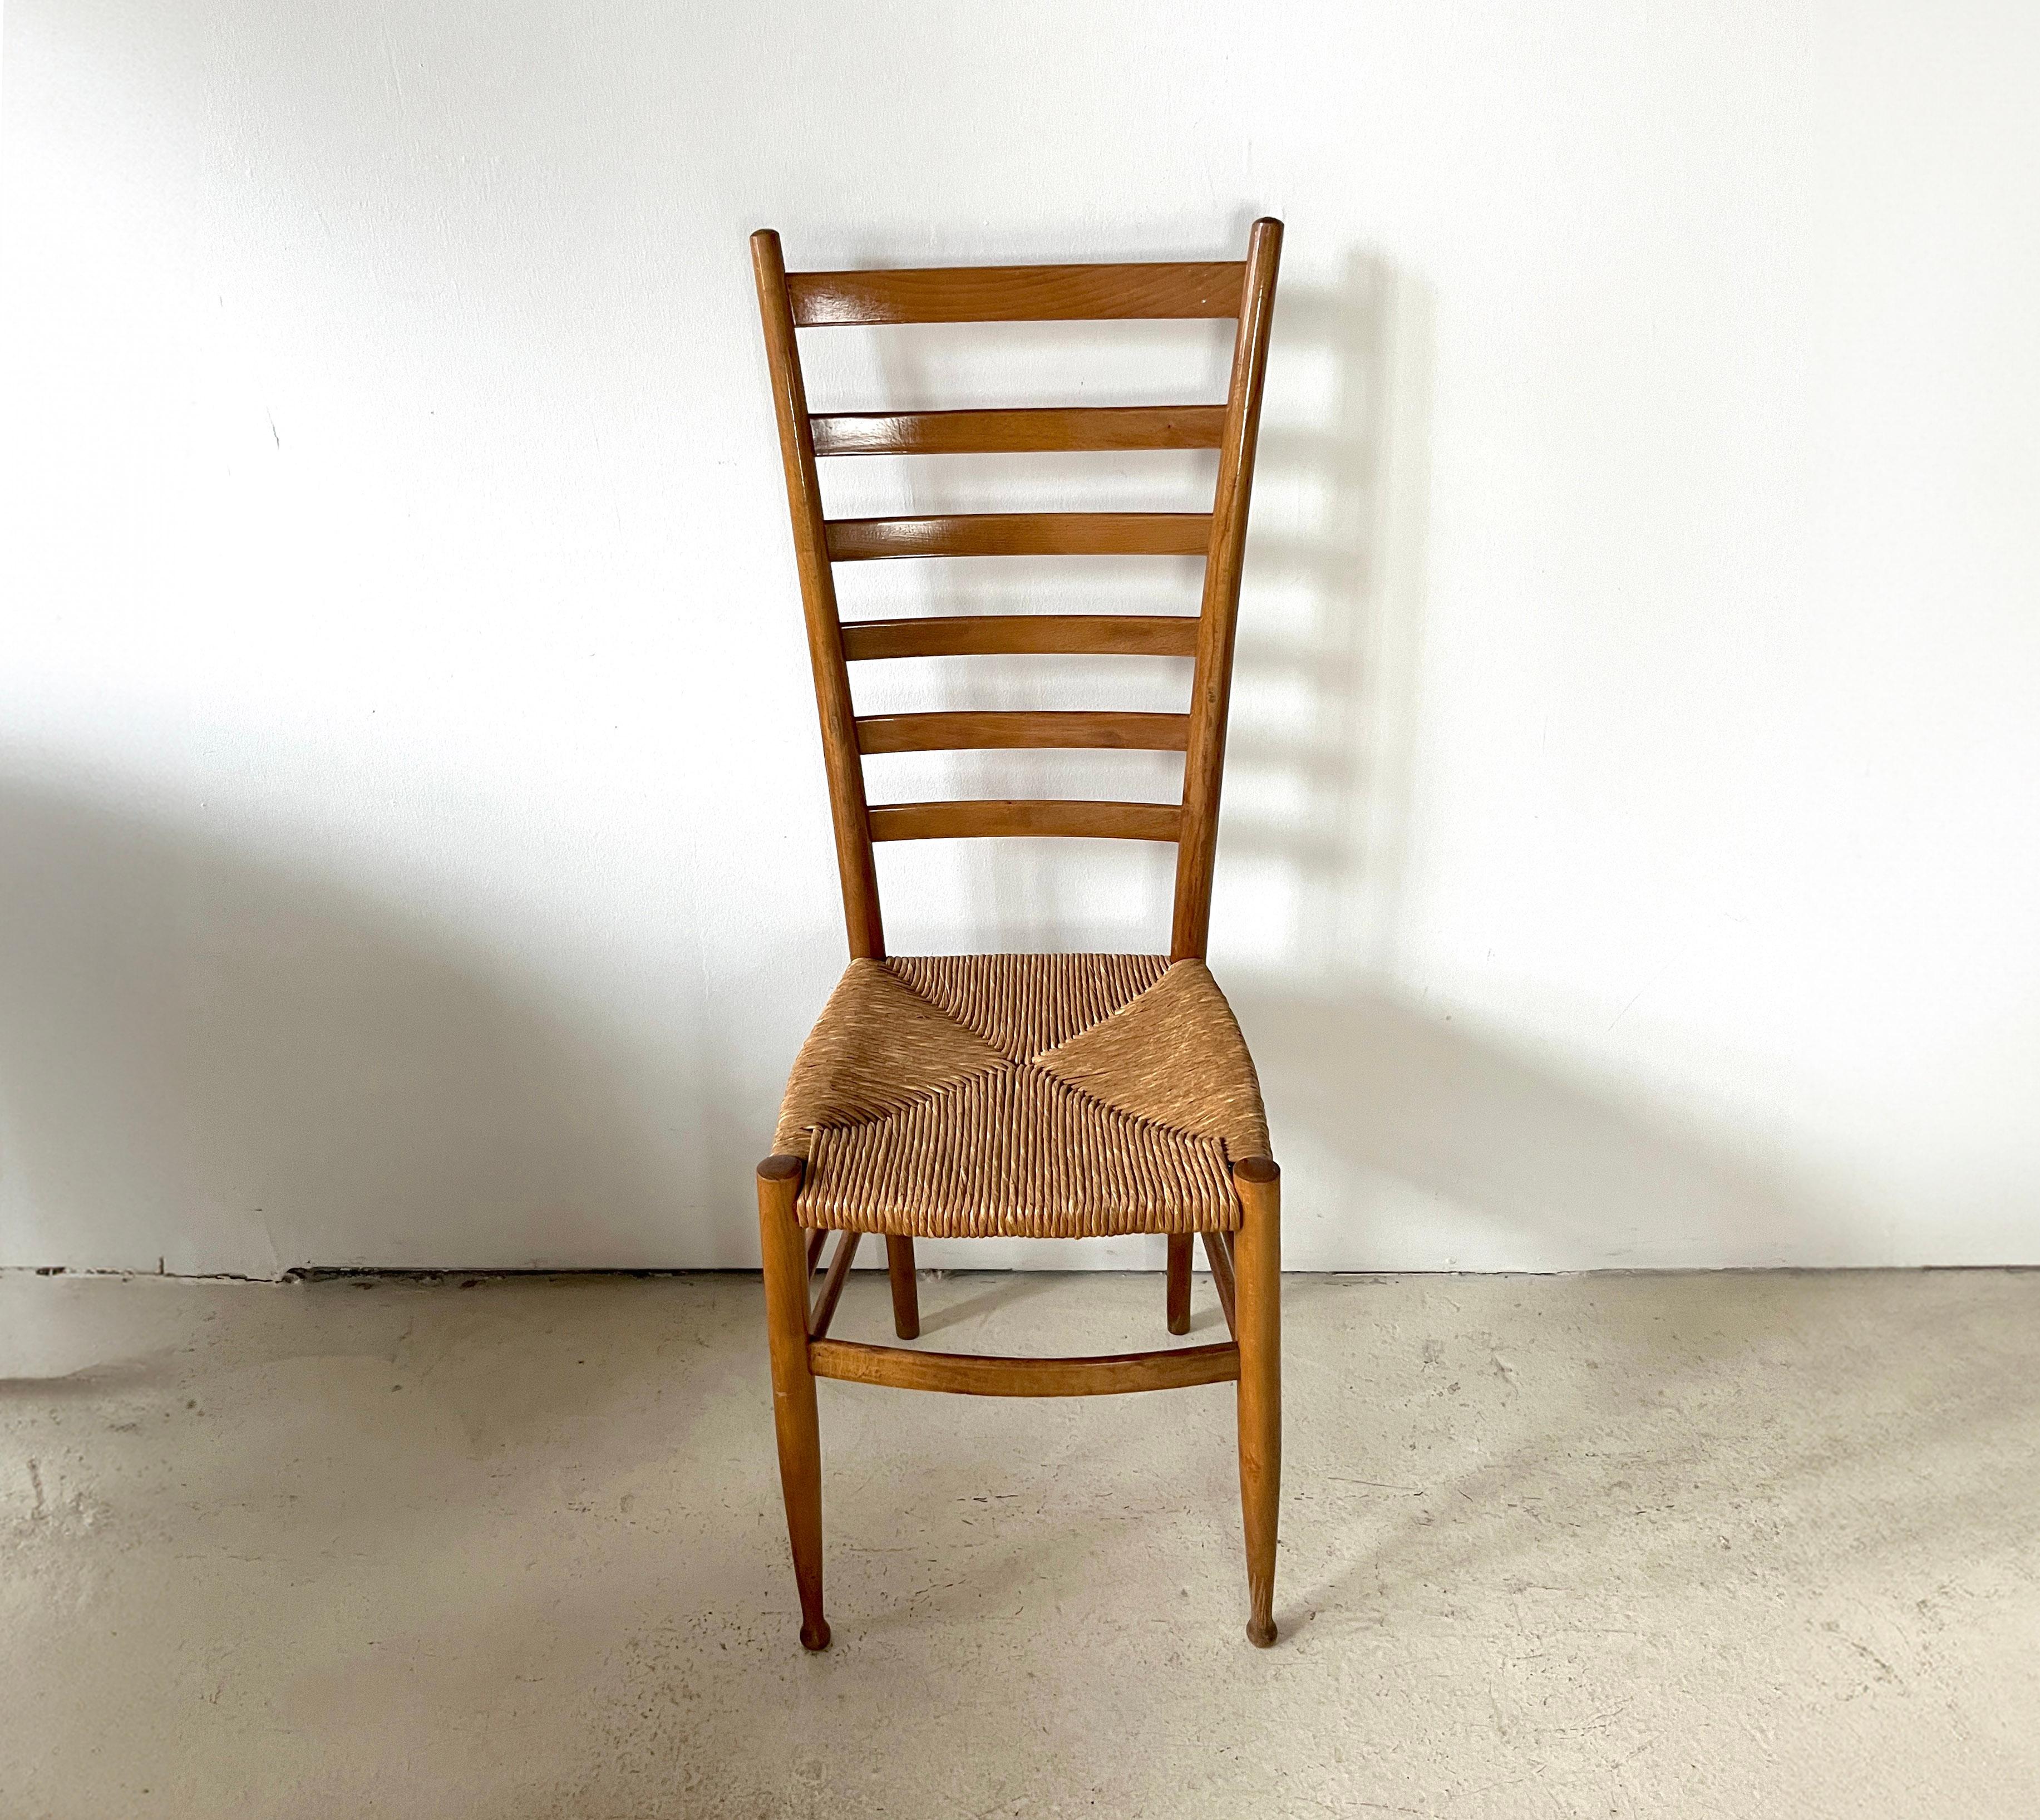 Single elegant Italian dining chair from the 1950s featuring a ladderback wood frame and rush seat. Originally made in Italy, sticker remnants attached to the underside of a stretcher.

Dimensions: 43.5” H x 15” W x 15” D
18.5” seat height

Very